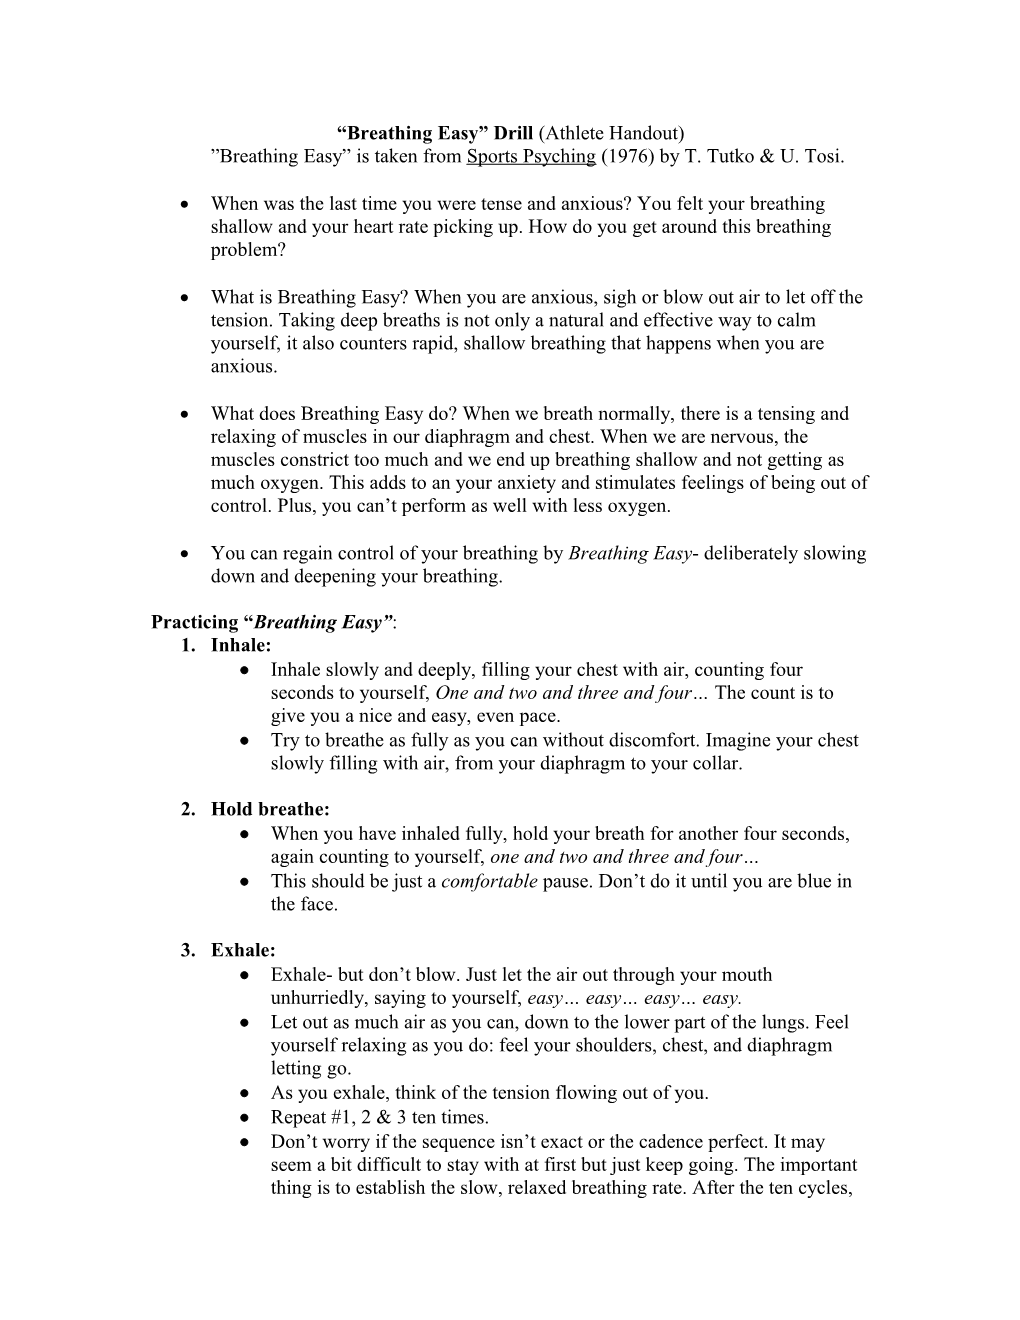 Coach S Script For: Breathing Easy Drill